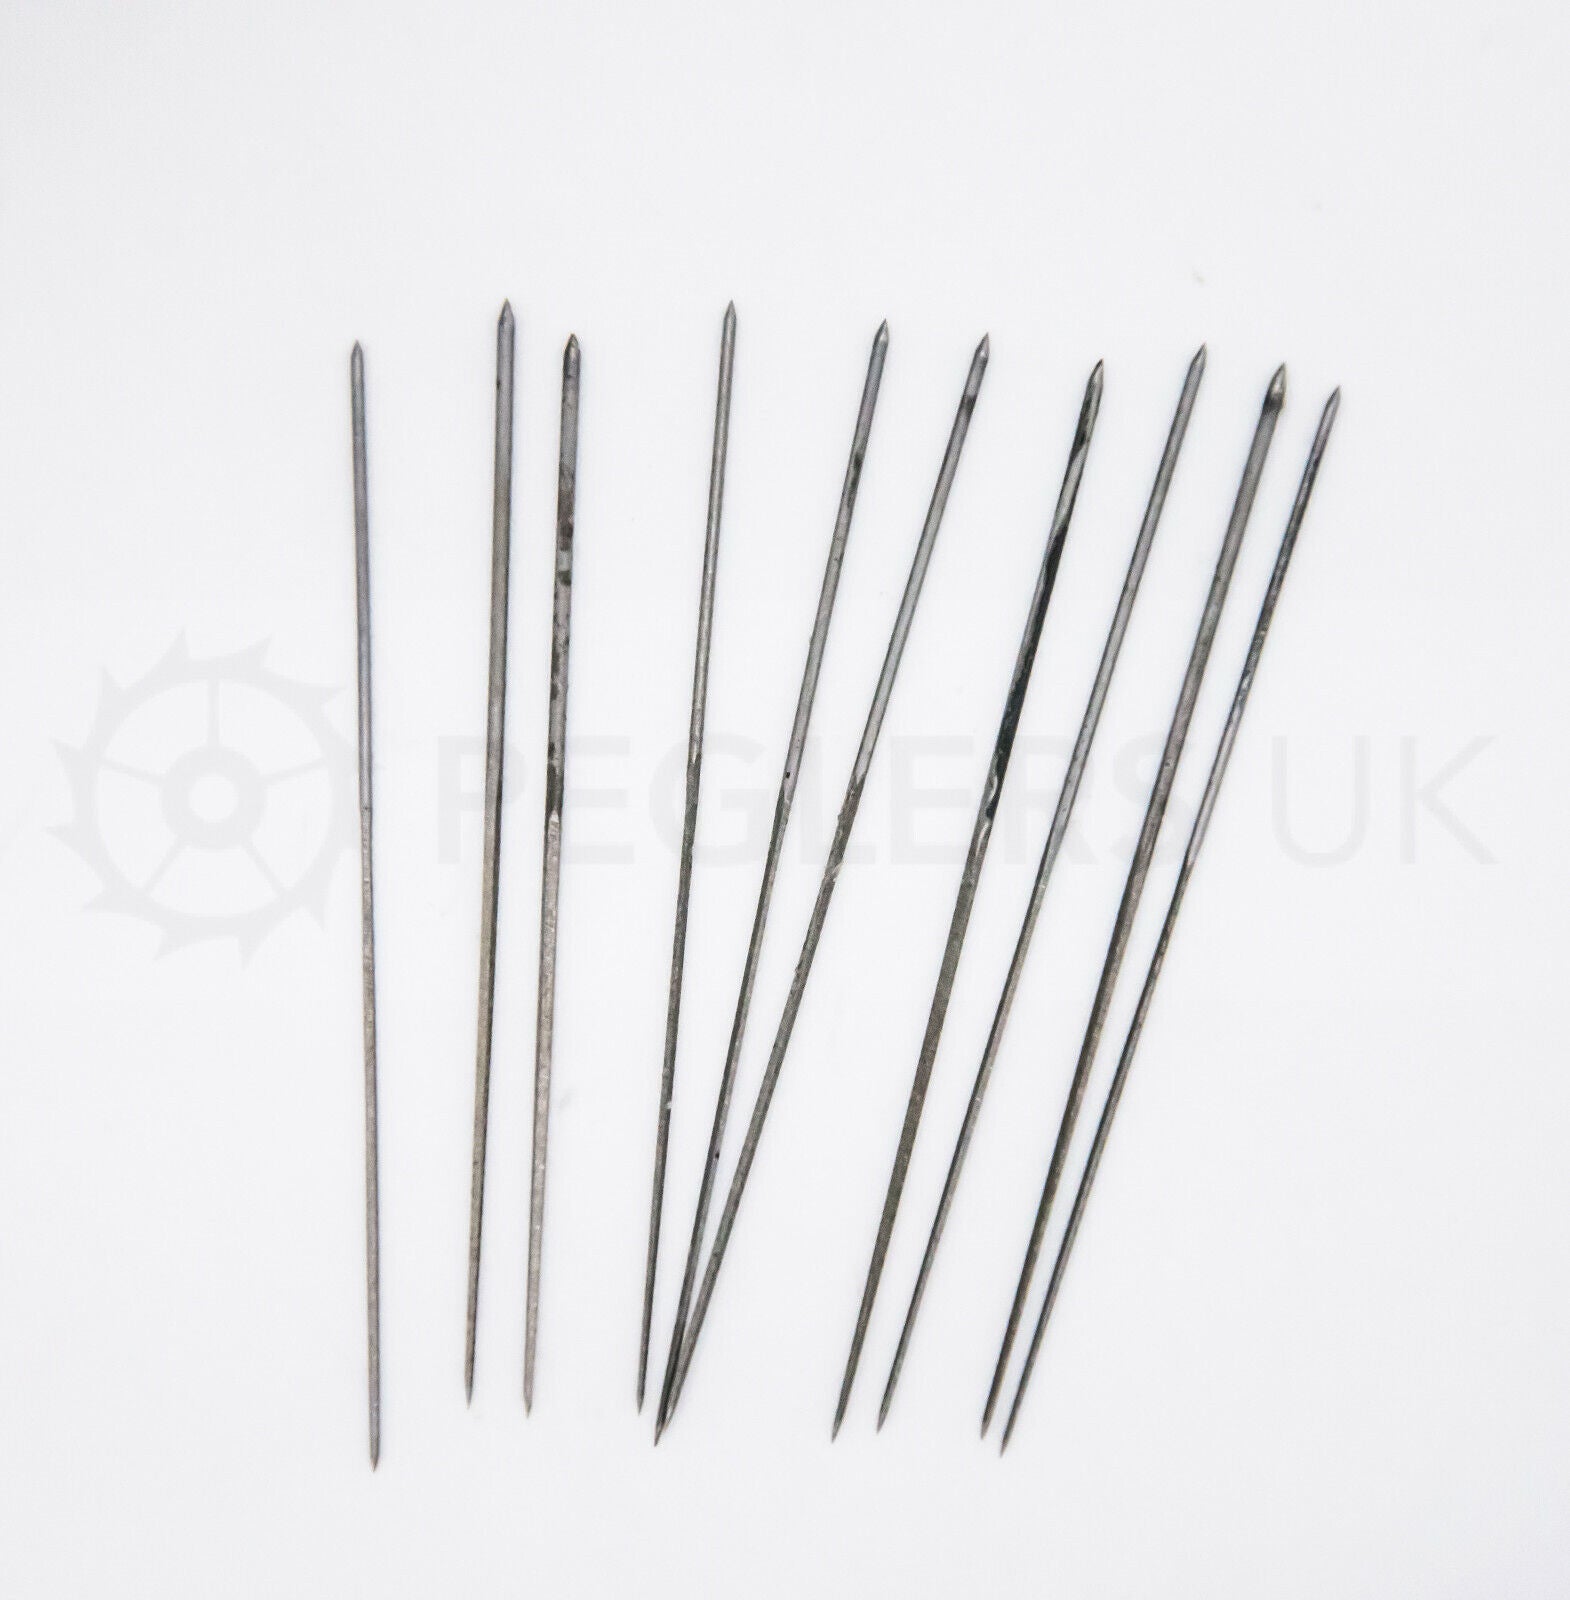 Set of 10x Cutting Broaches 0.6 - 0.8mm